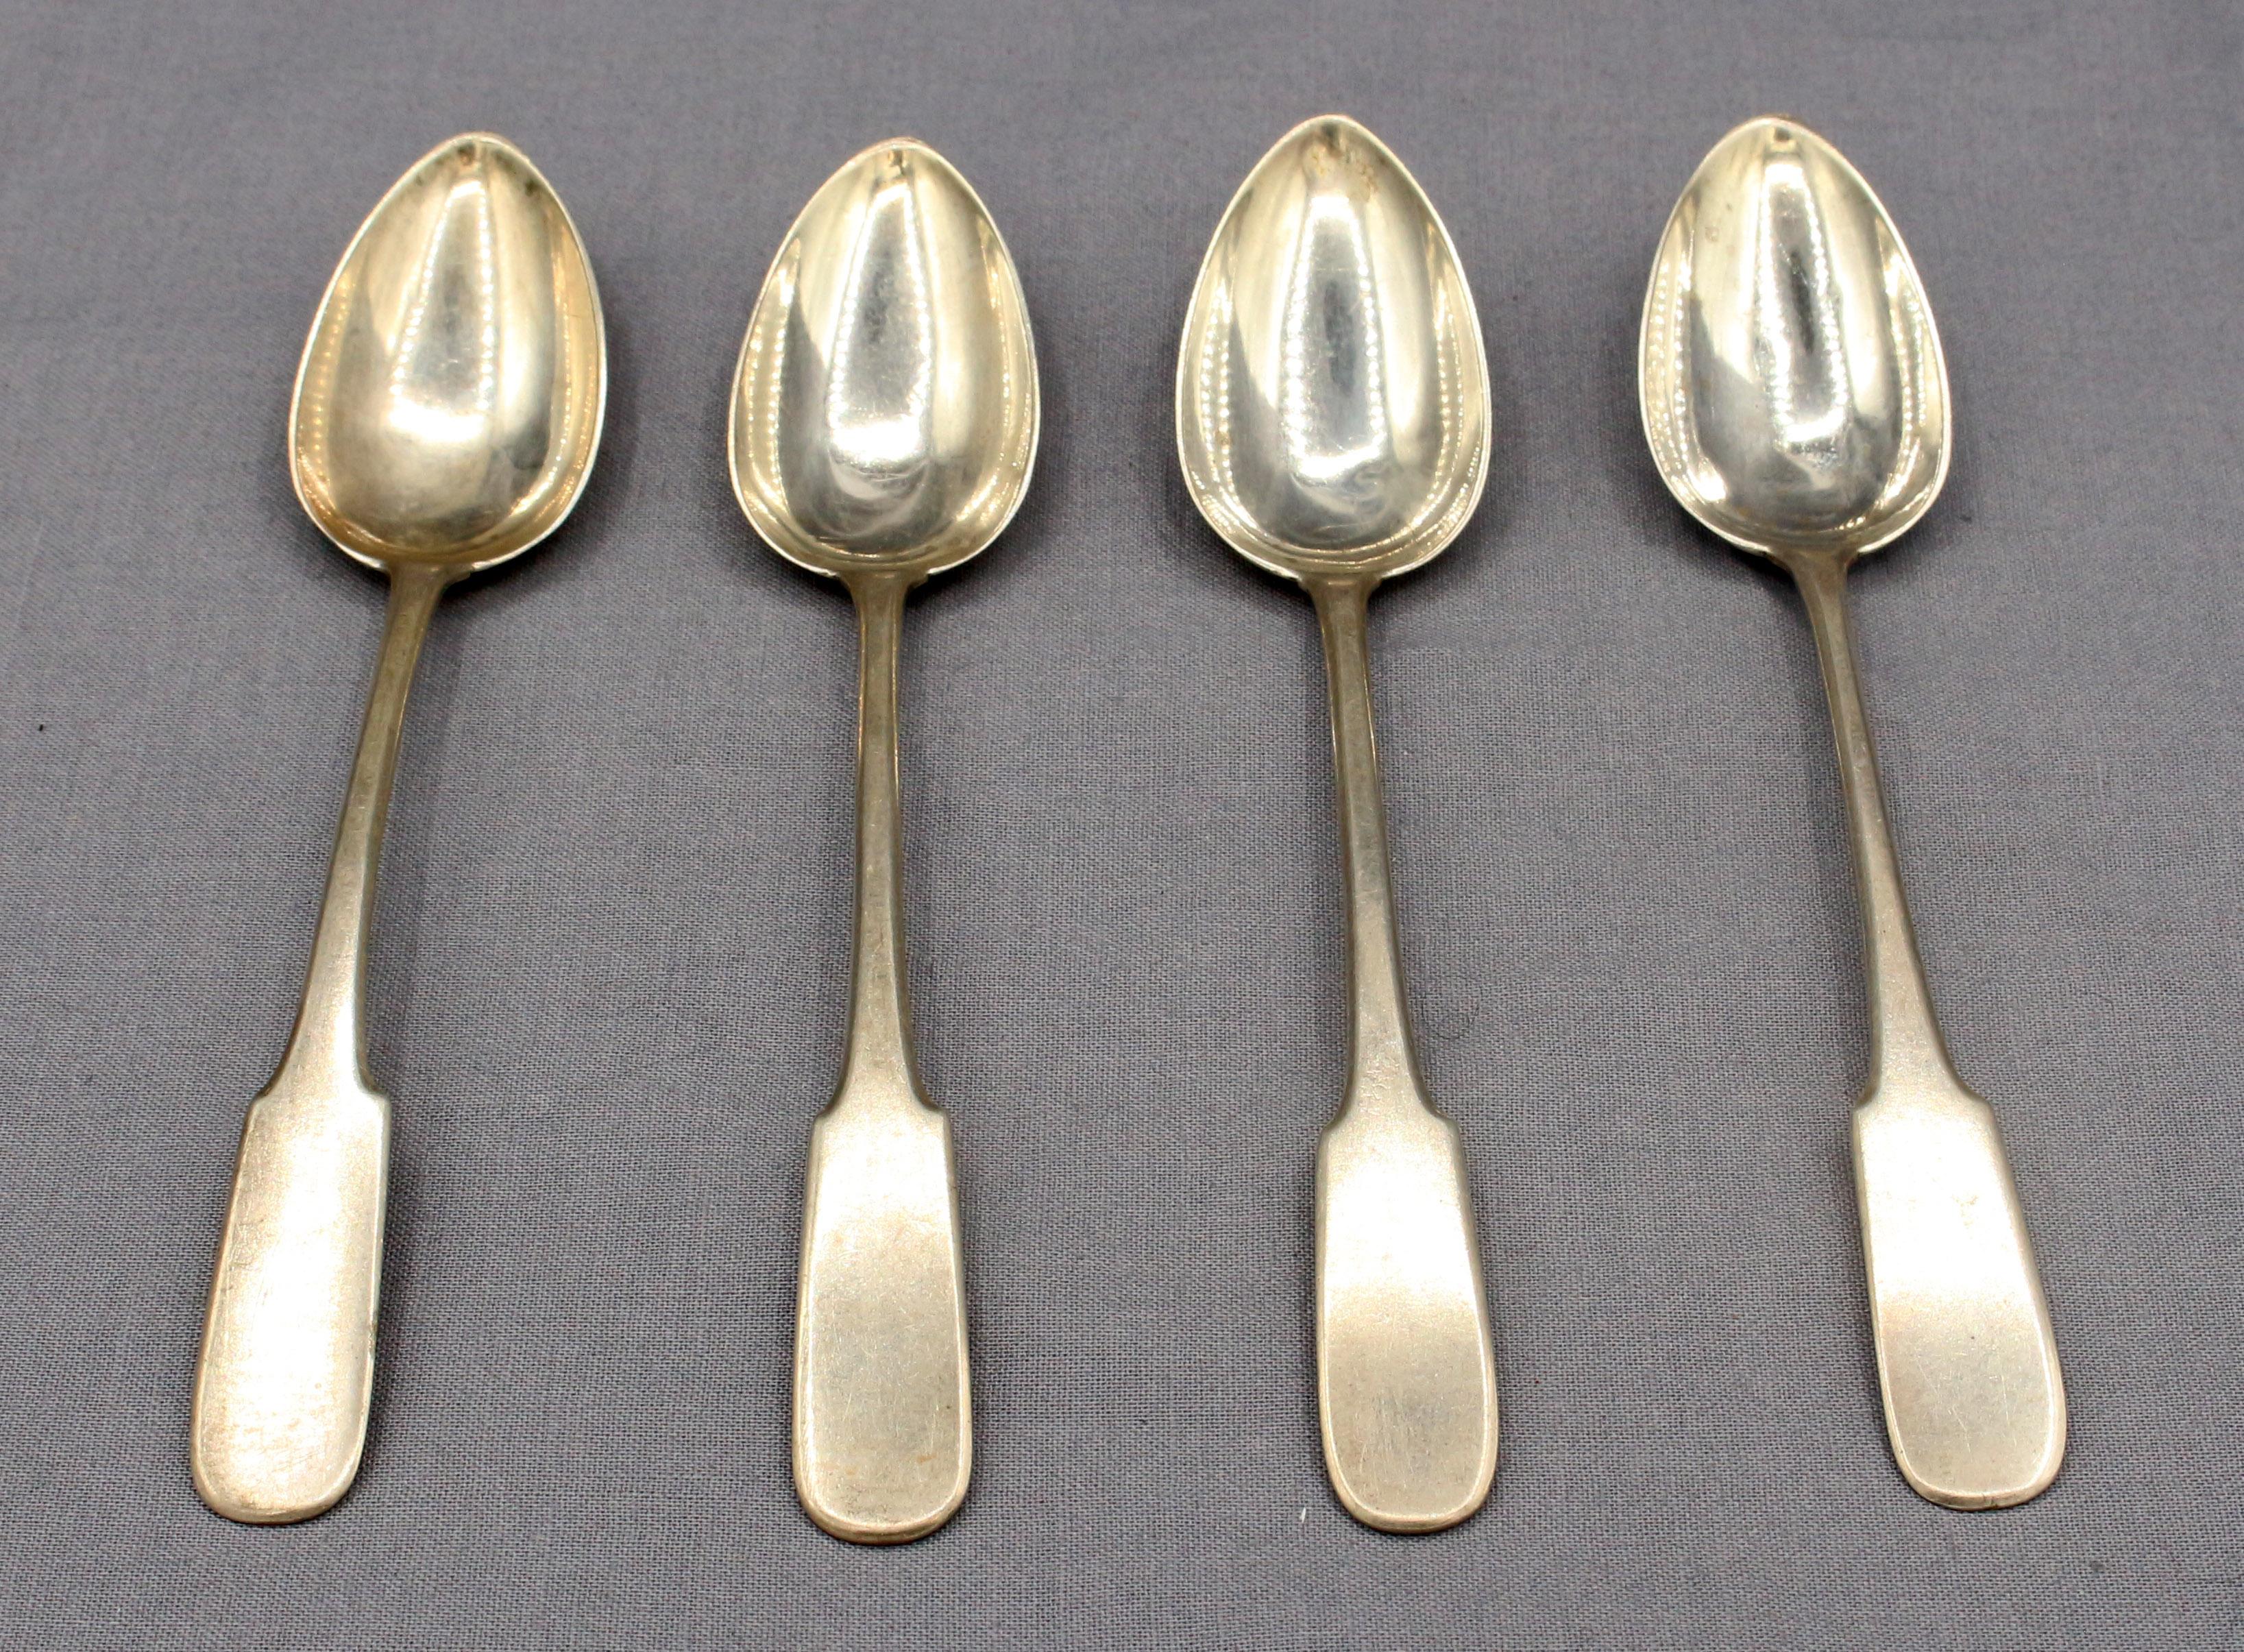 A c.1820 set of 4 teaspoons, Scottish provincial from Perth, made by Rob & Rob Keay (1st entered c.1780 as a mark). RK & RK with Perth hallmark only. Fiddle pattern. Never engraved. 1.70 troy oz. Soft patina.
5 1/2